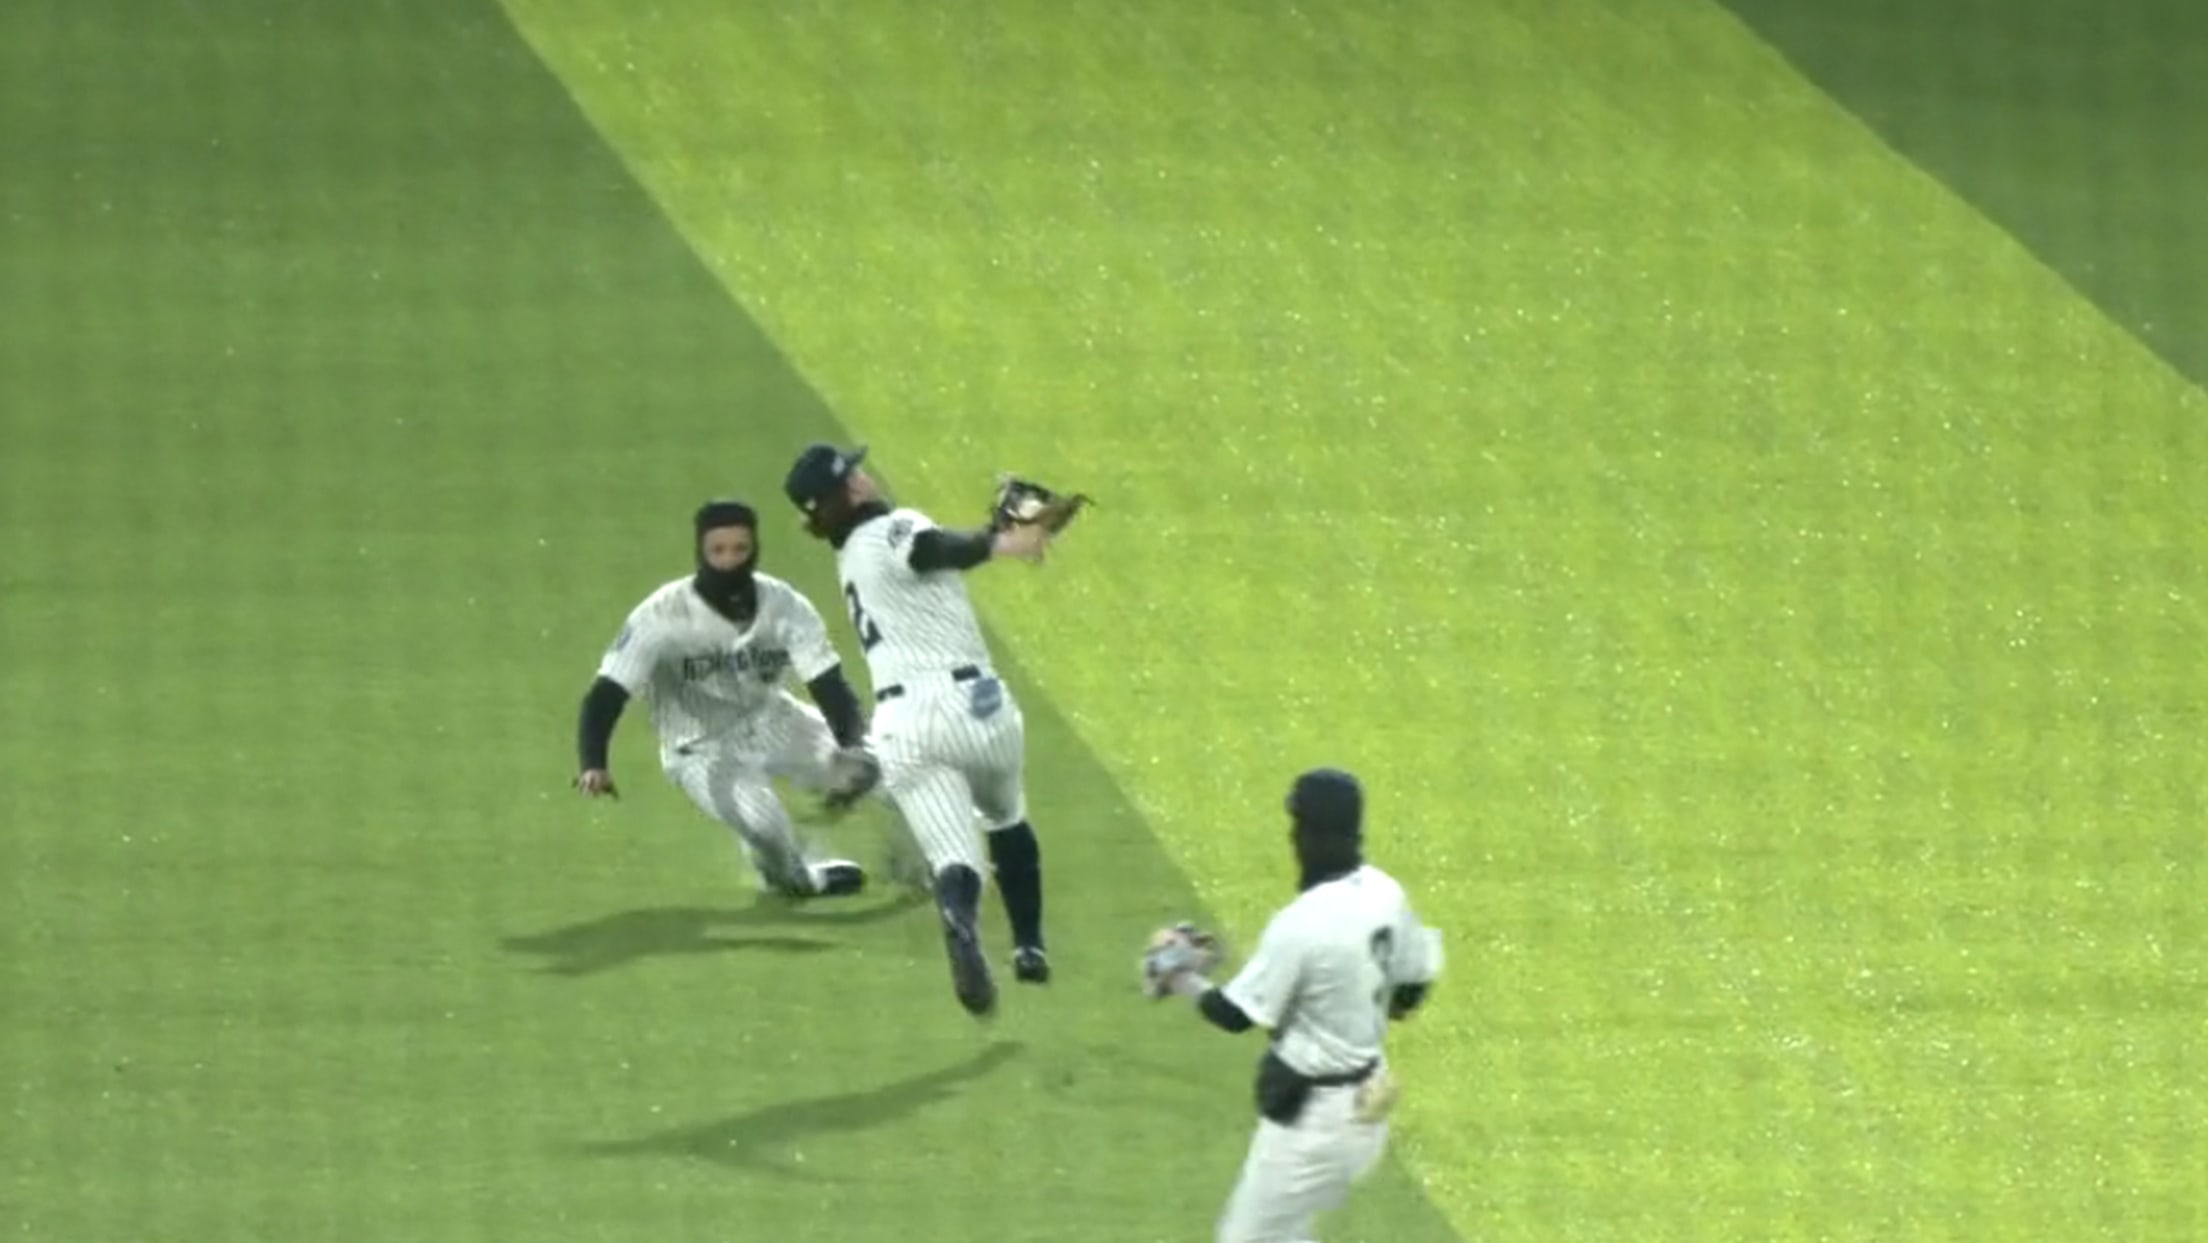 Yankees prospect Roc Riggio makes an over-the-shoulder catch before tripping over a diving teammate